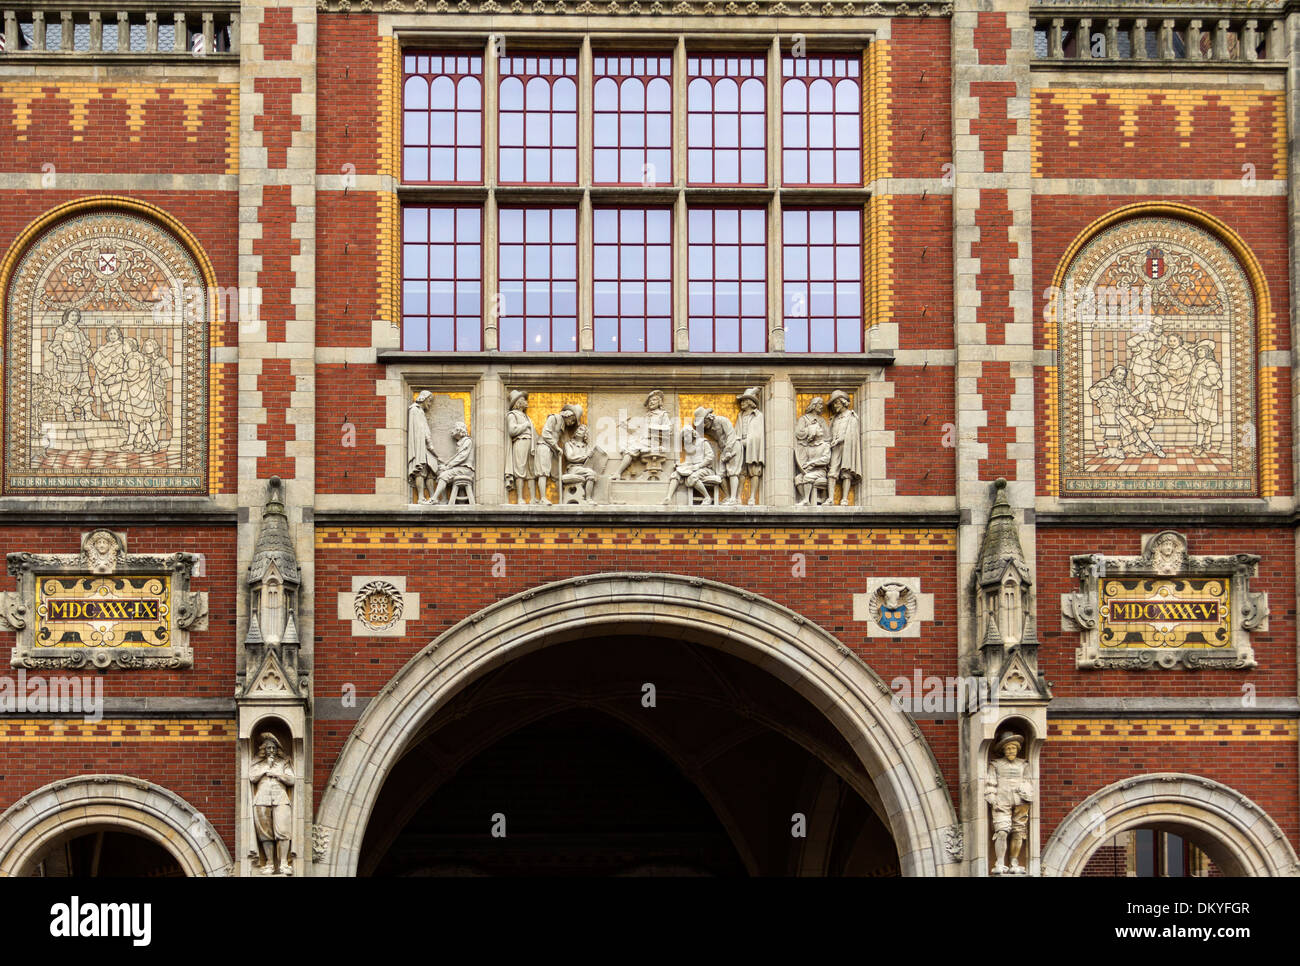 AMSTERDAM RIJKSMUSEUM WALL DETAIL OF FRIEZE AND STATUES OVER THE ROADWAY ARCH Stock Photo